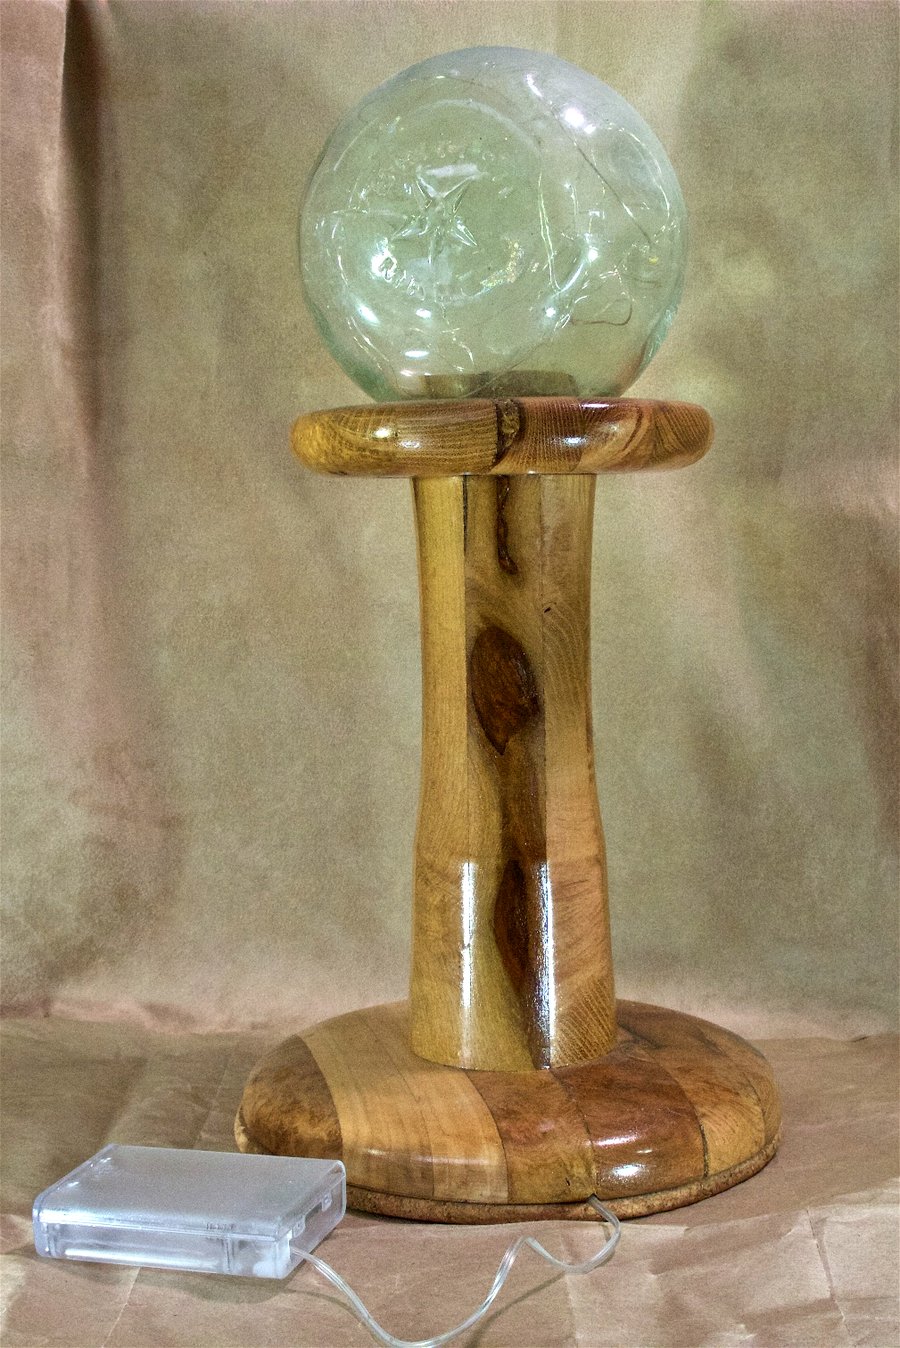 Unique table lamp, LEDs, turned wood glass fishing float made by the sea. PR478